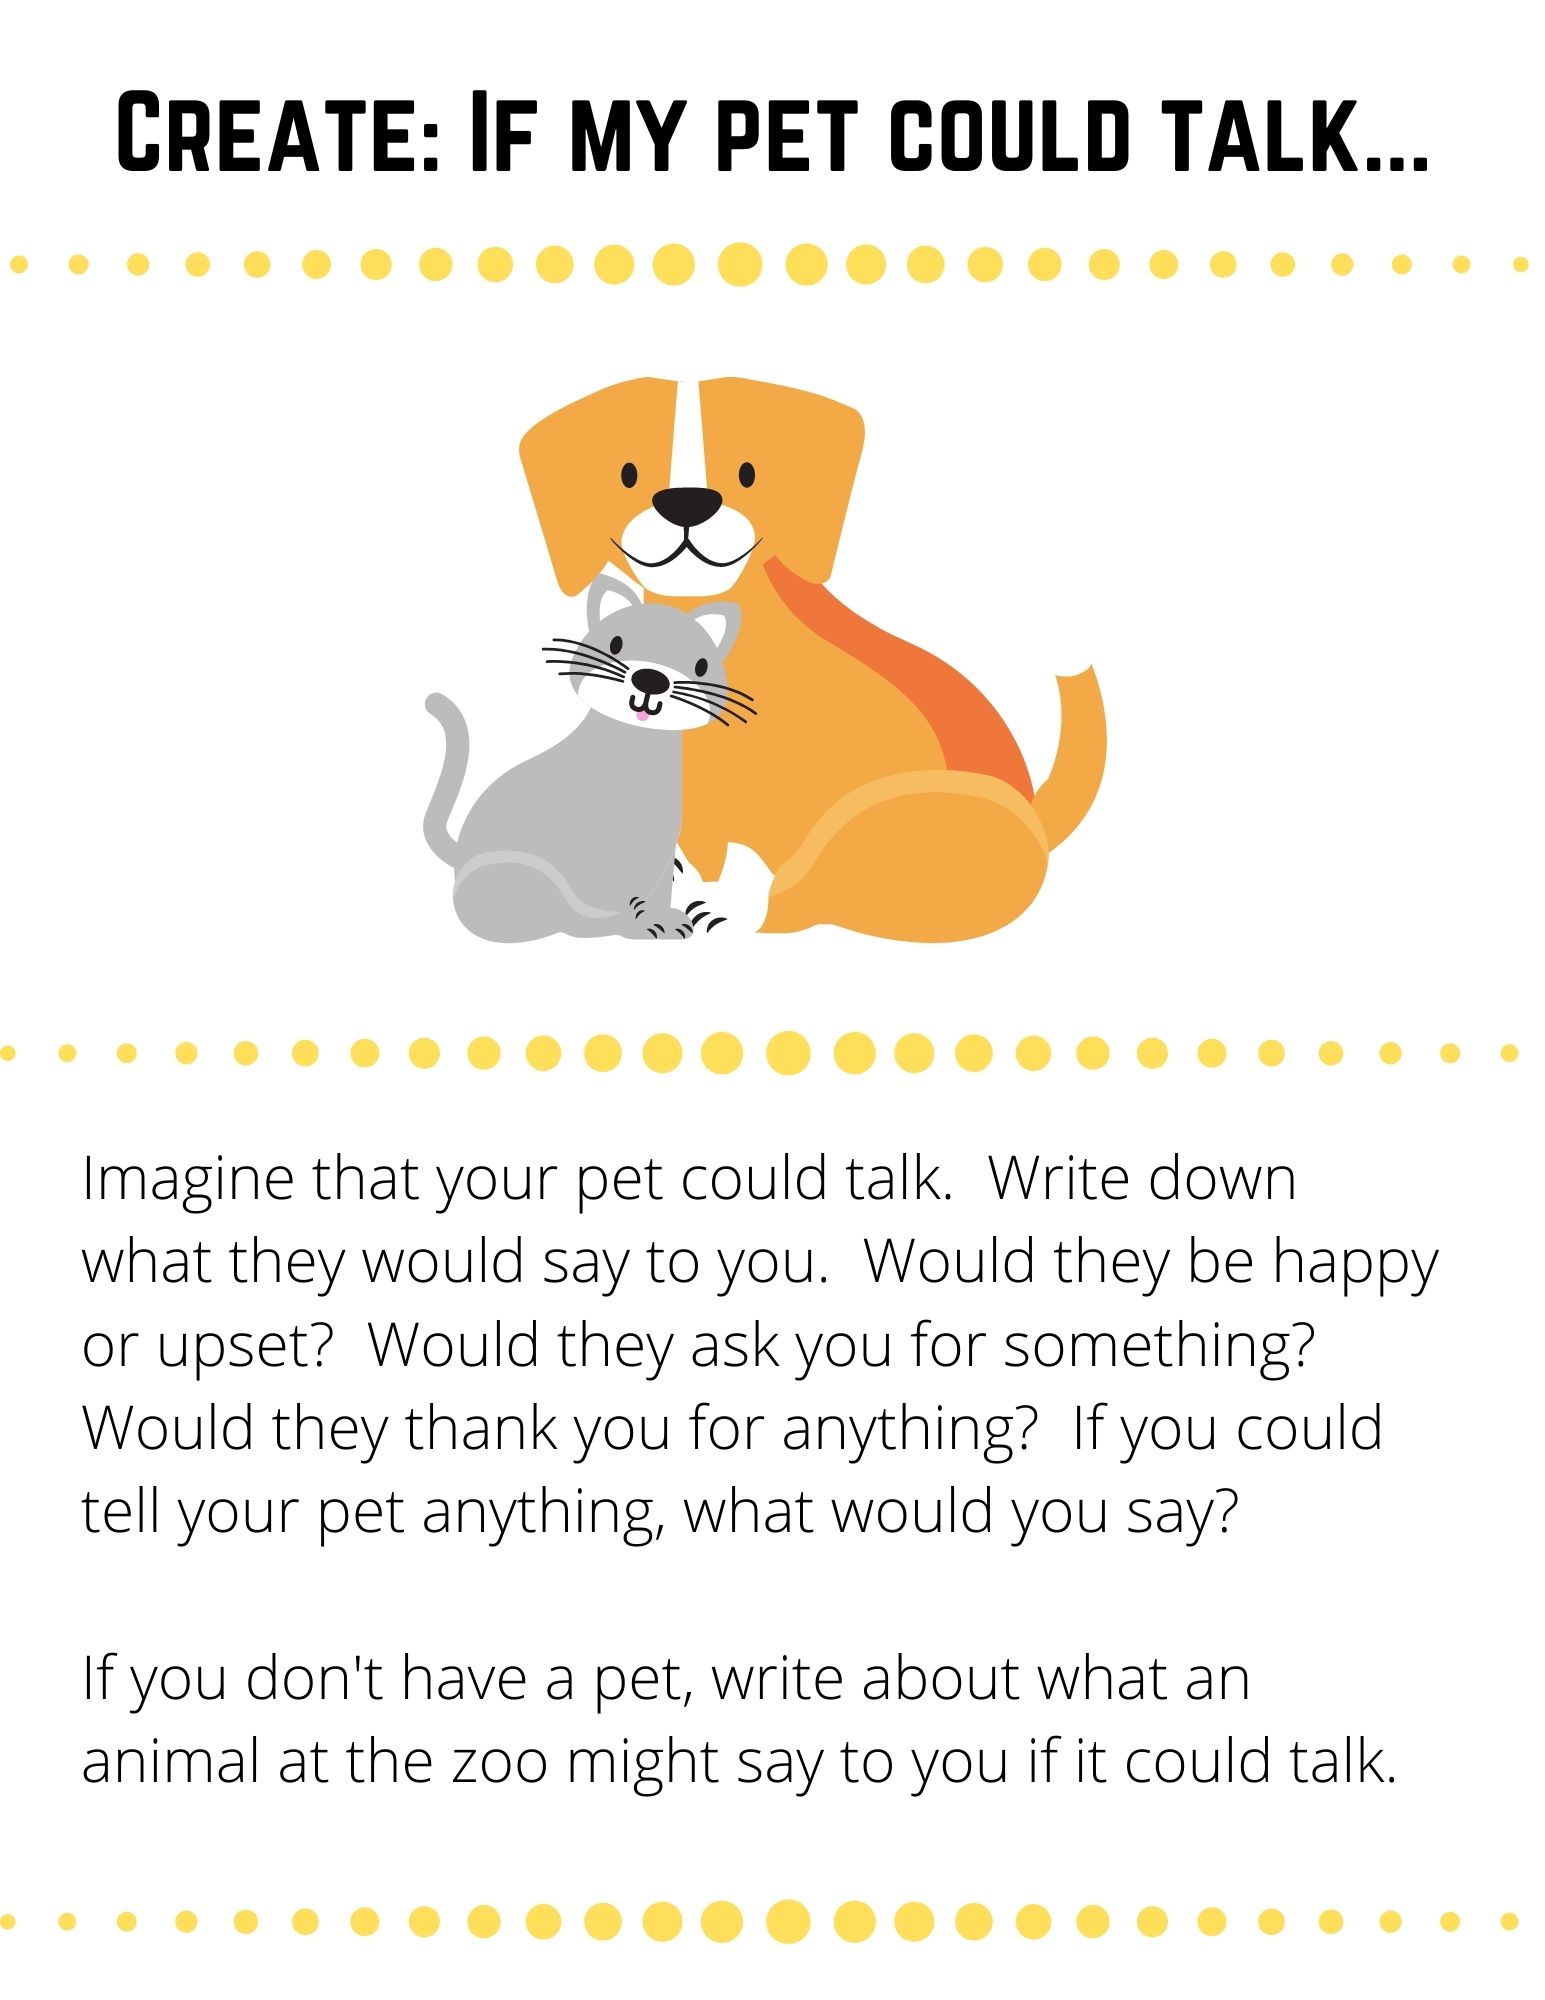 Imagine that your pet could talk.  Write down what they would say to you.  Would they be happy or upset?  Would they ask you for something?  Would they thank you for anything?  If you could tell your pet anything, what would you say?  If you don't have a pet, write about what an animal at the zoo might say to you if it could talk.